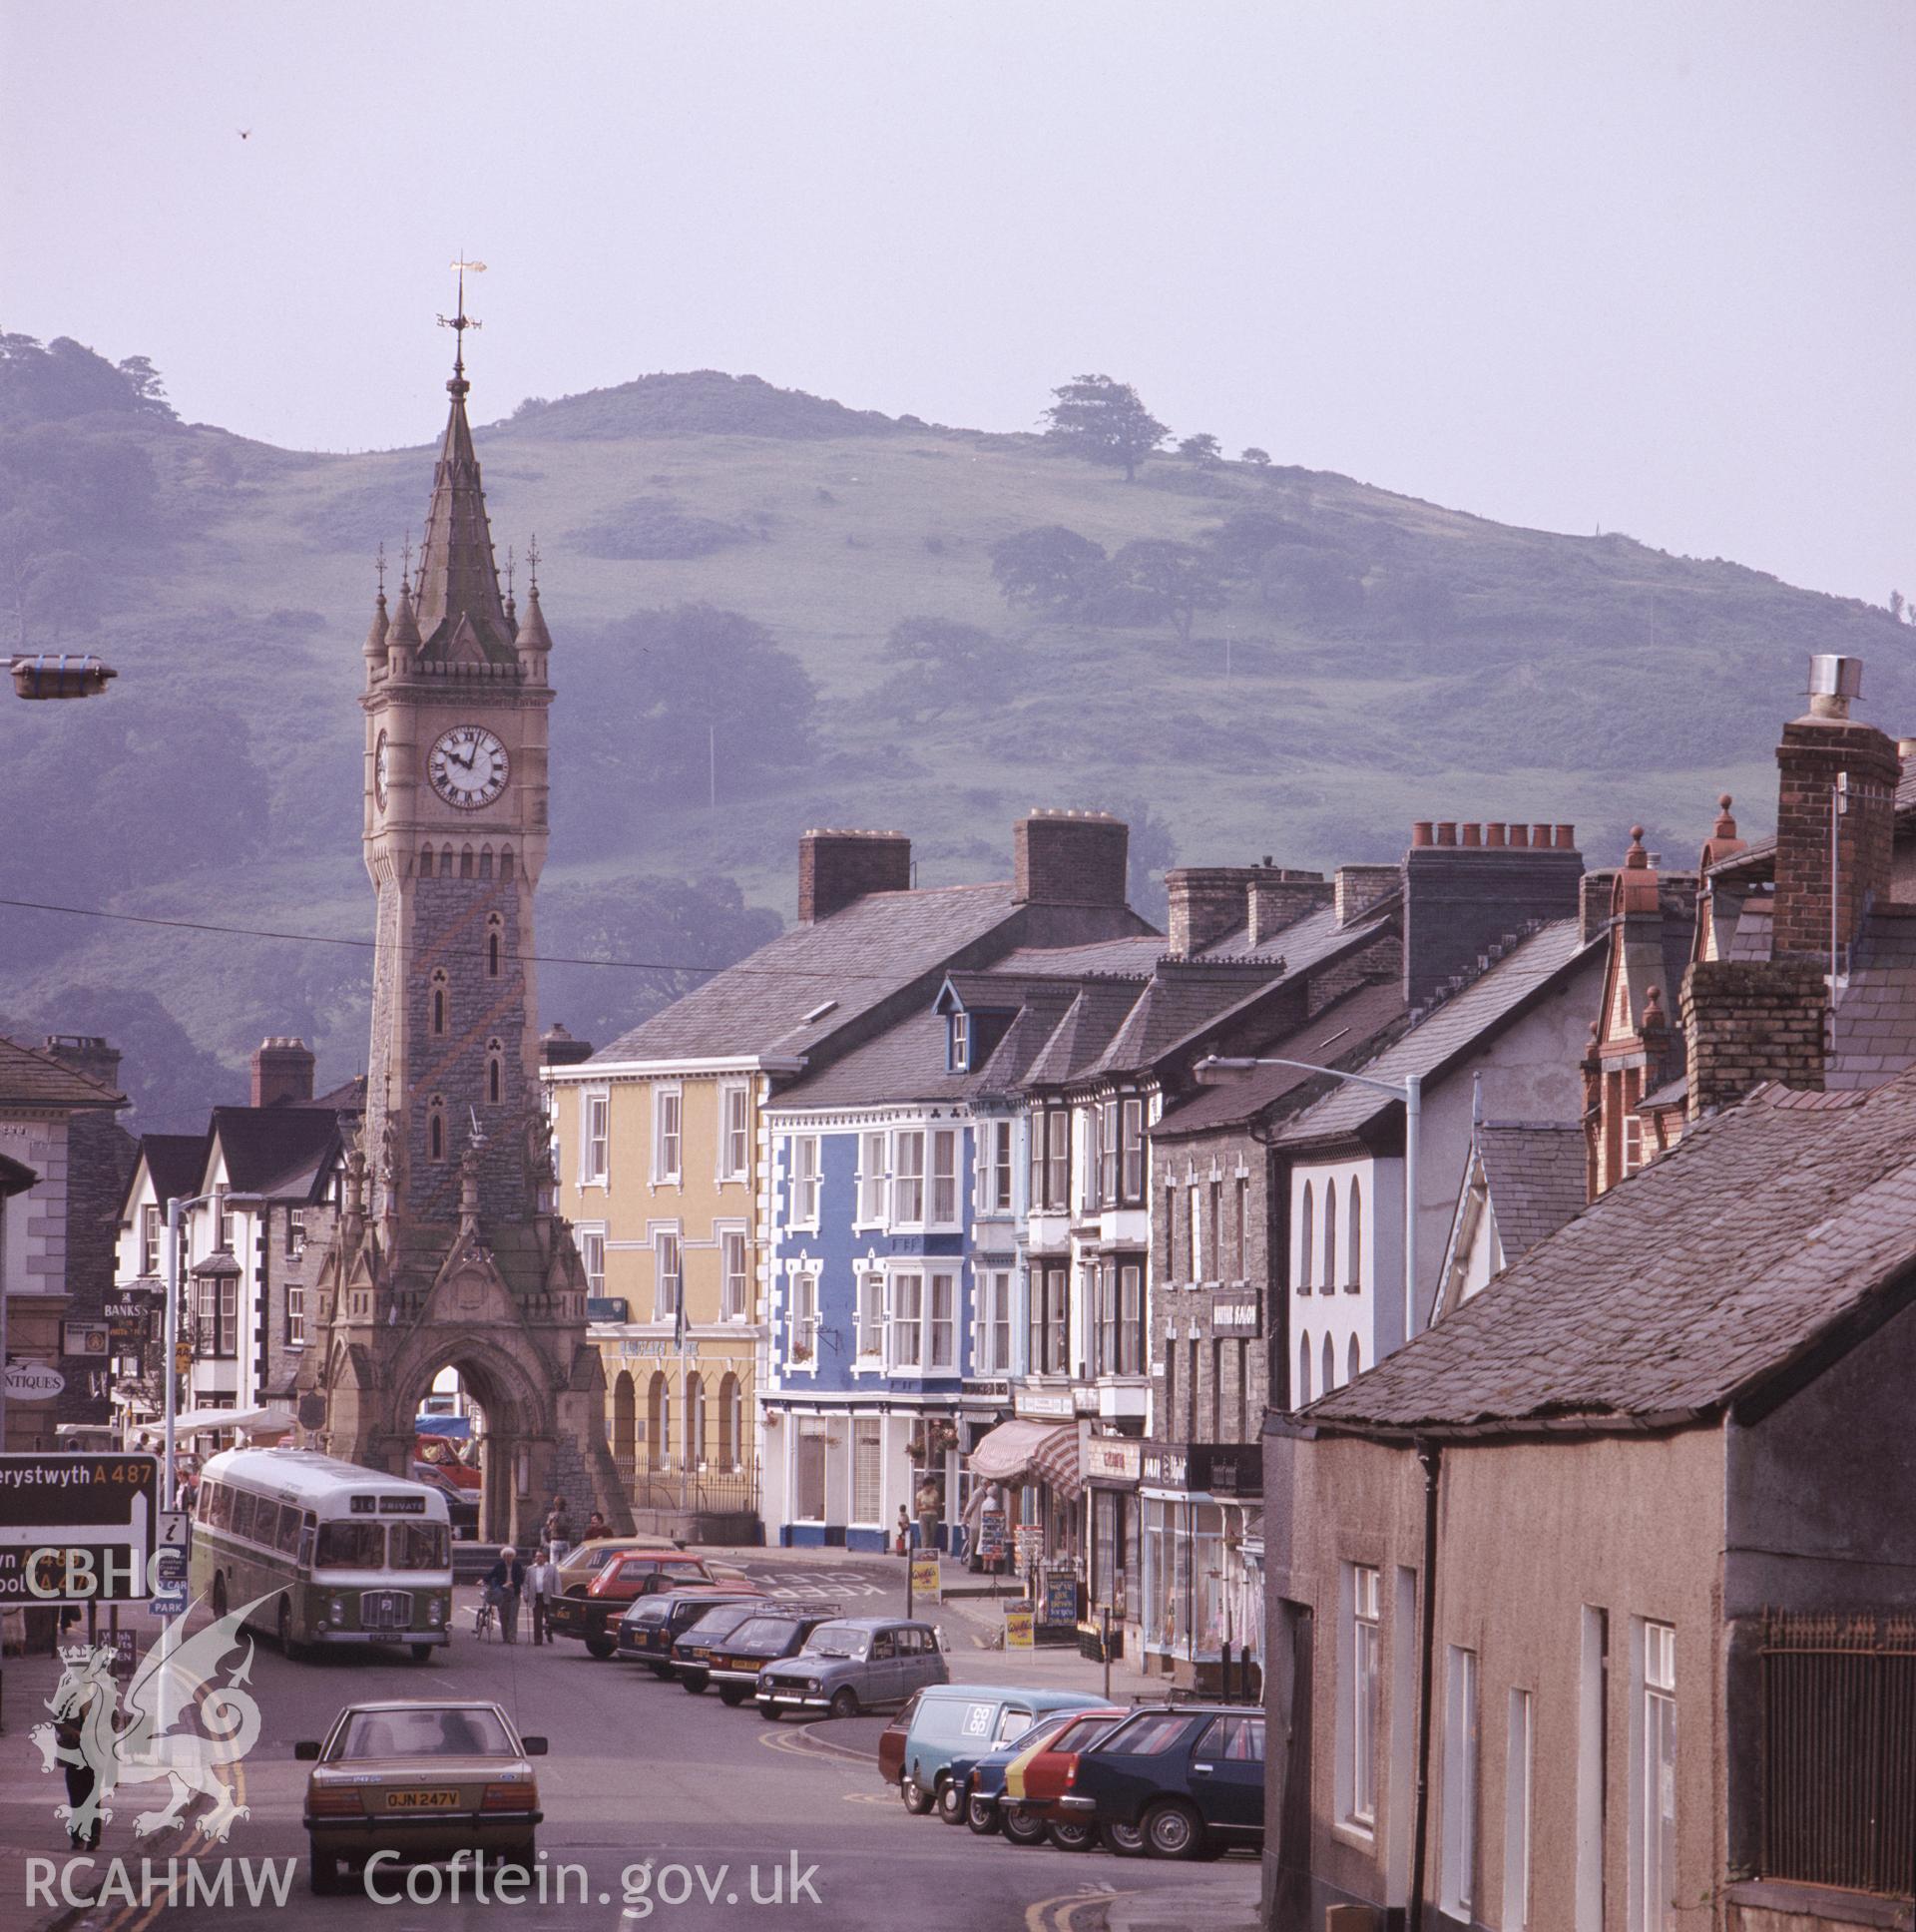 1 colour transparency showing view of Machynlleth town centre; collated by the former Central Office of Information.